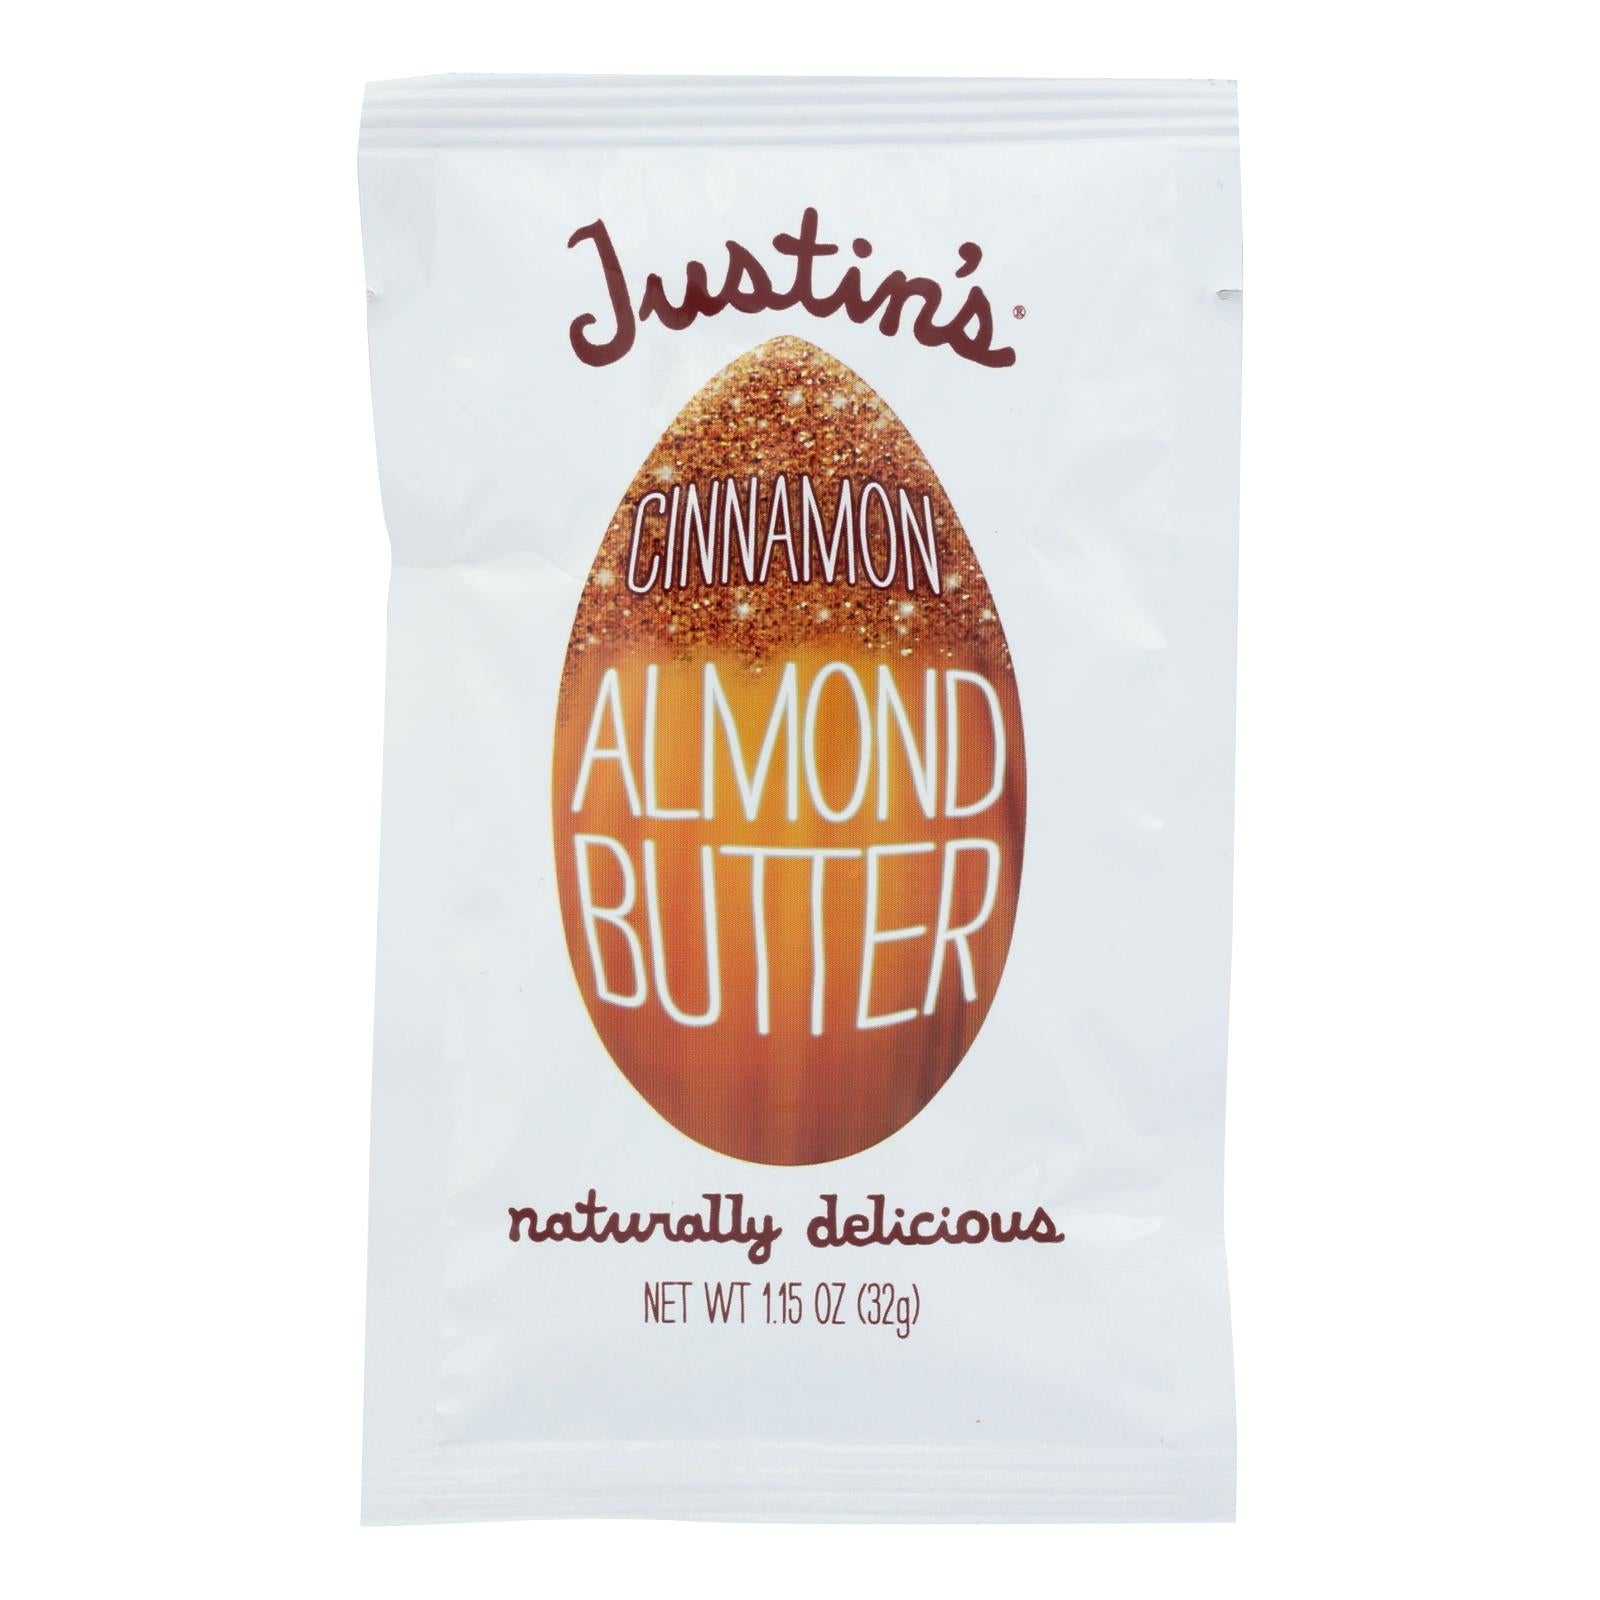 Justin's Nut Butter Squeeze Pack - Almond Butter - Cinnamon - Case Of 10 - 1.15 Oz.